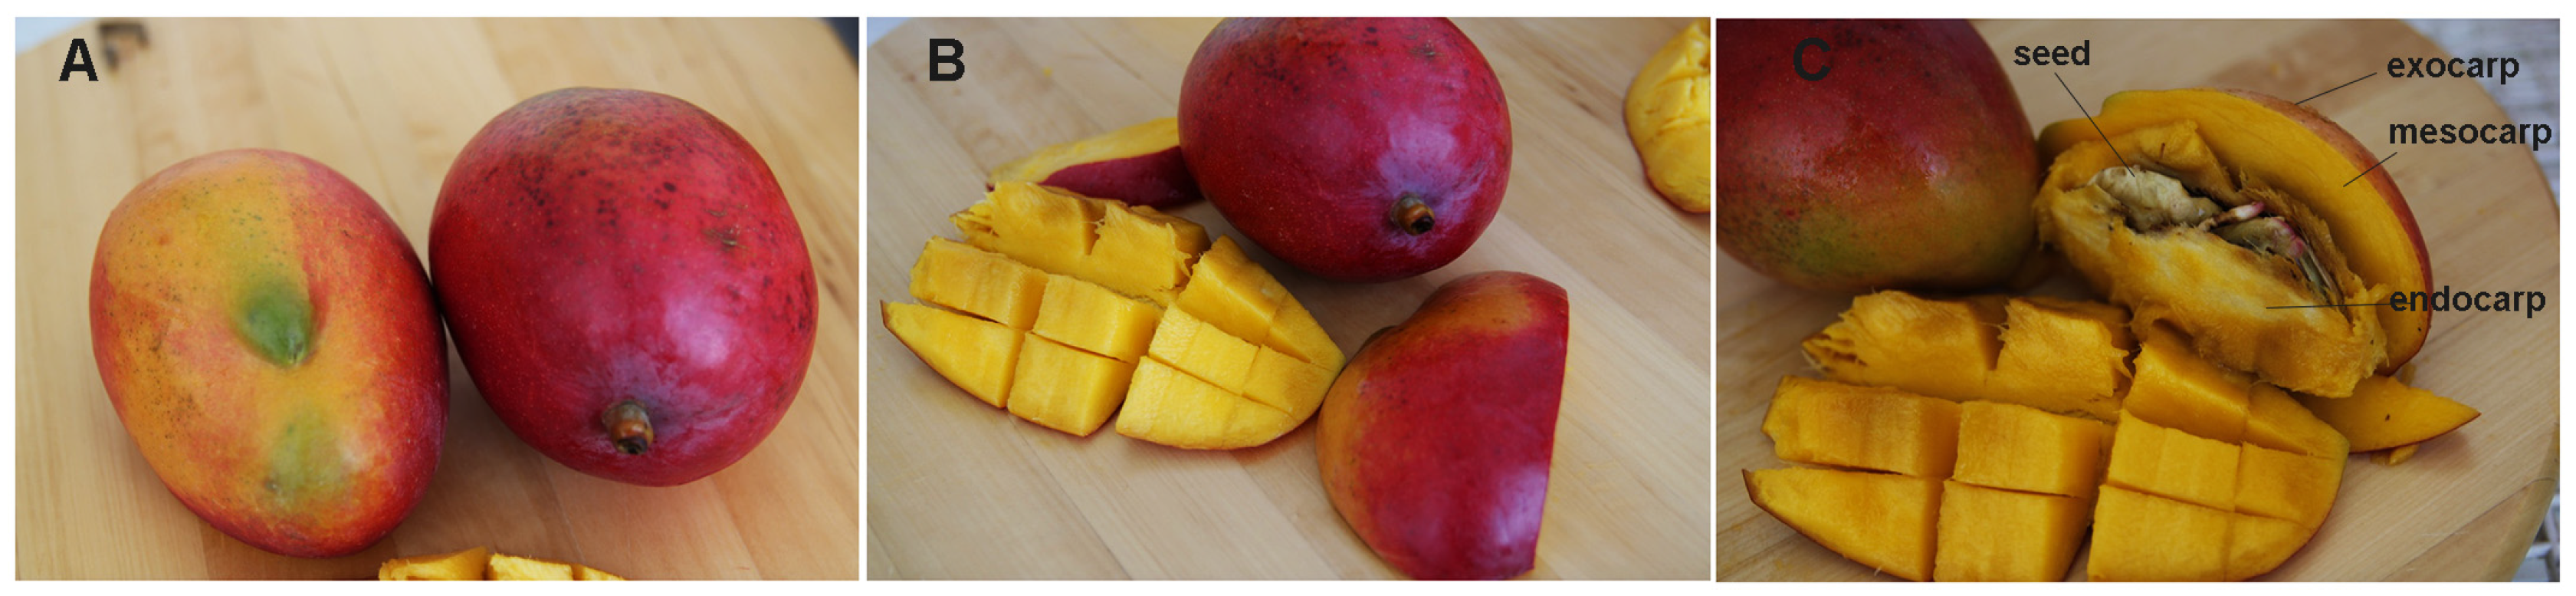 Nutrients | Free Full-Text | Multifaceted Health Benefits of Mangifera  indica L. (Mango): The Inestimable Value of Orchards Recently Planted in  Sicilian Rural Areas